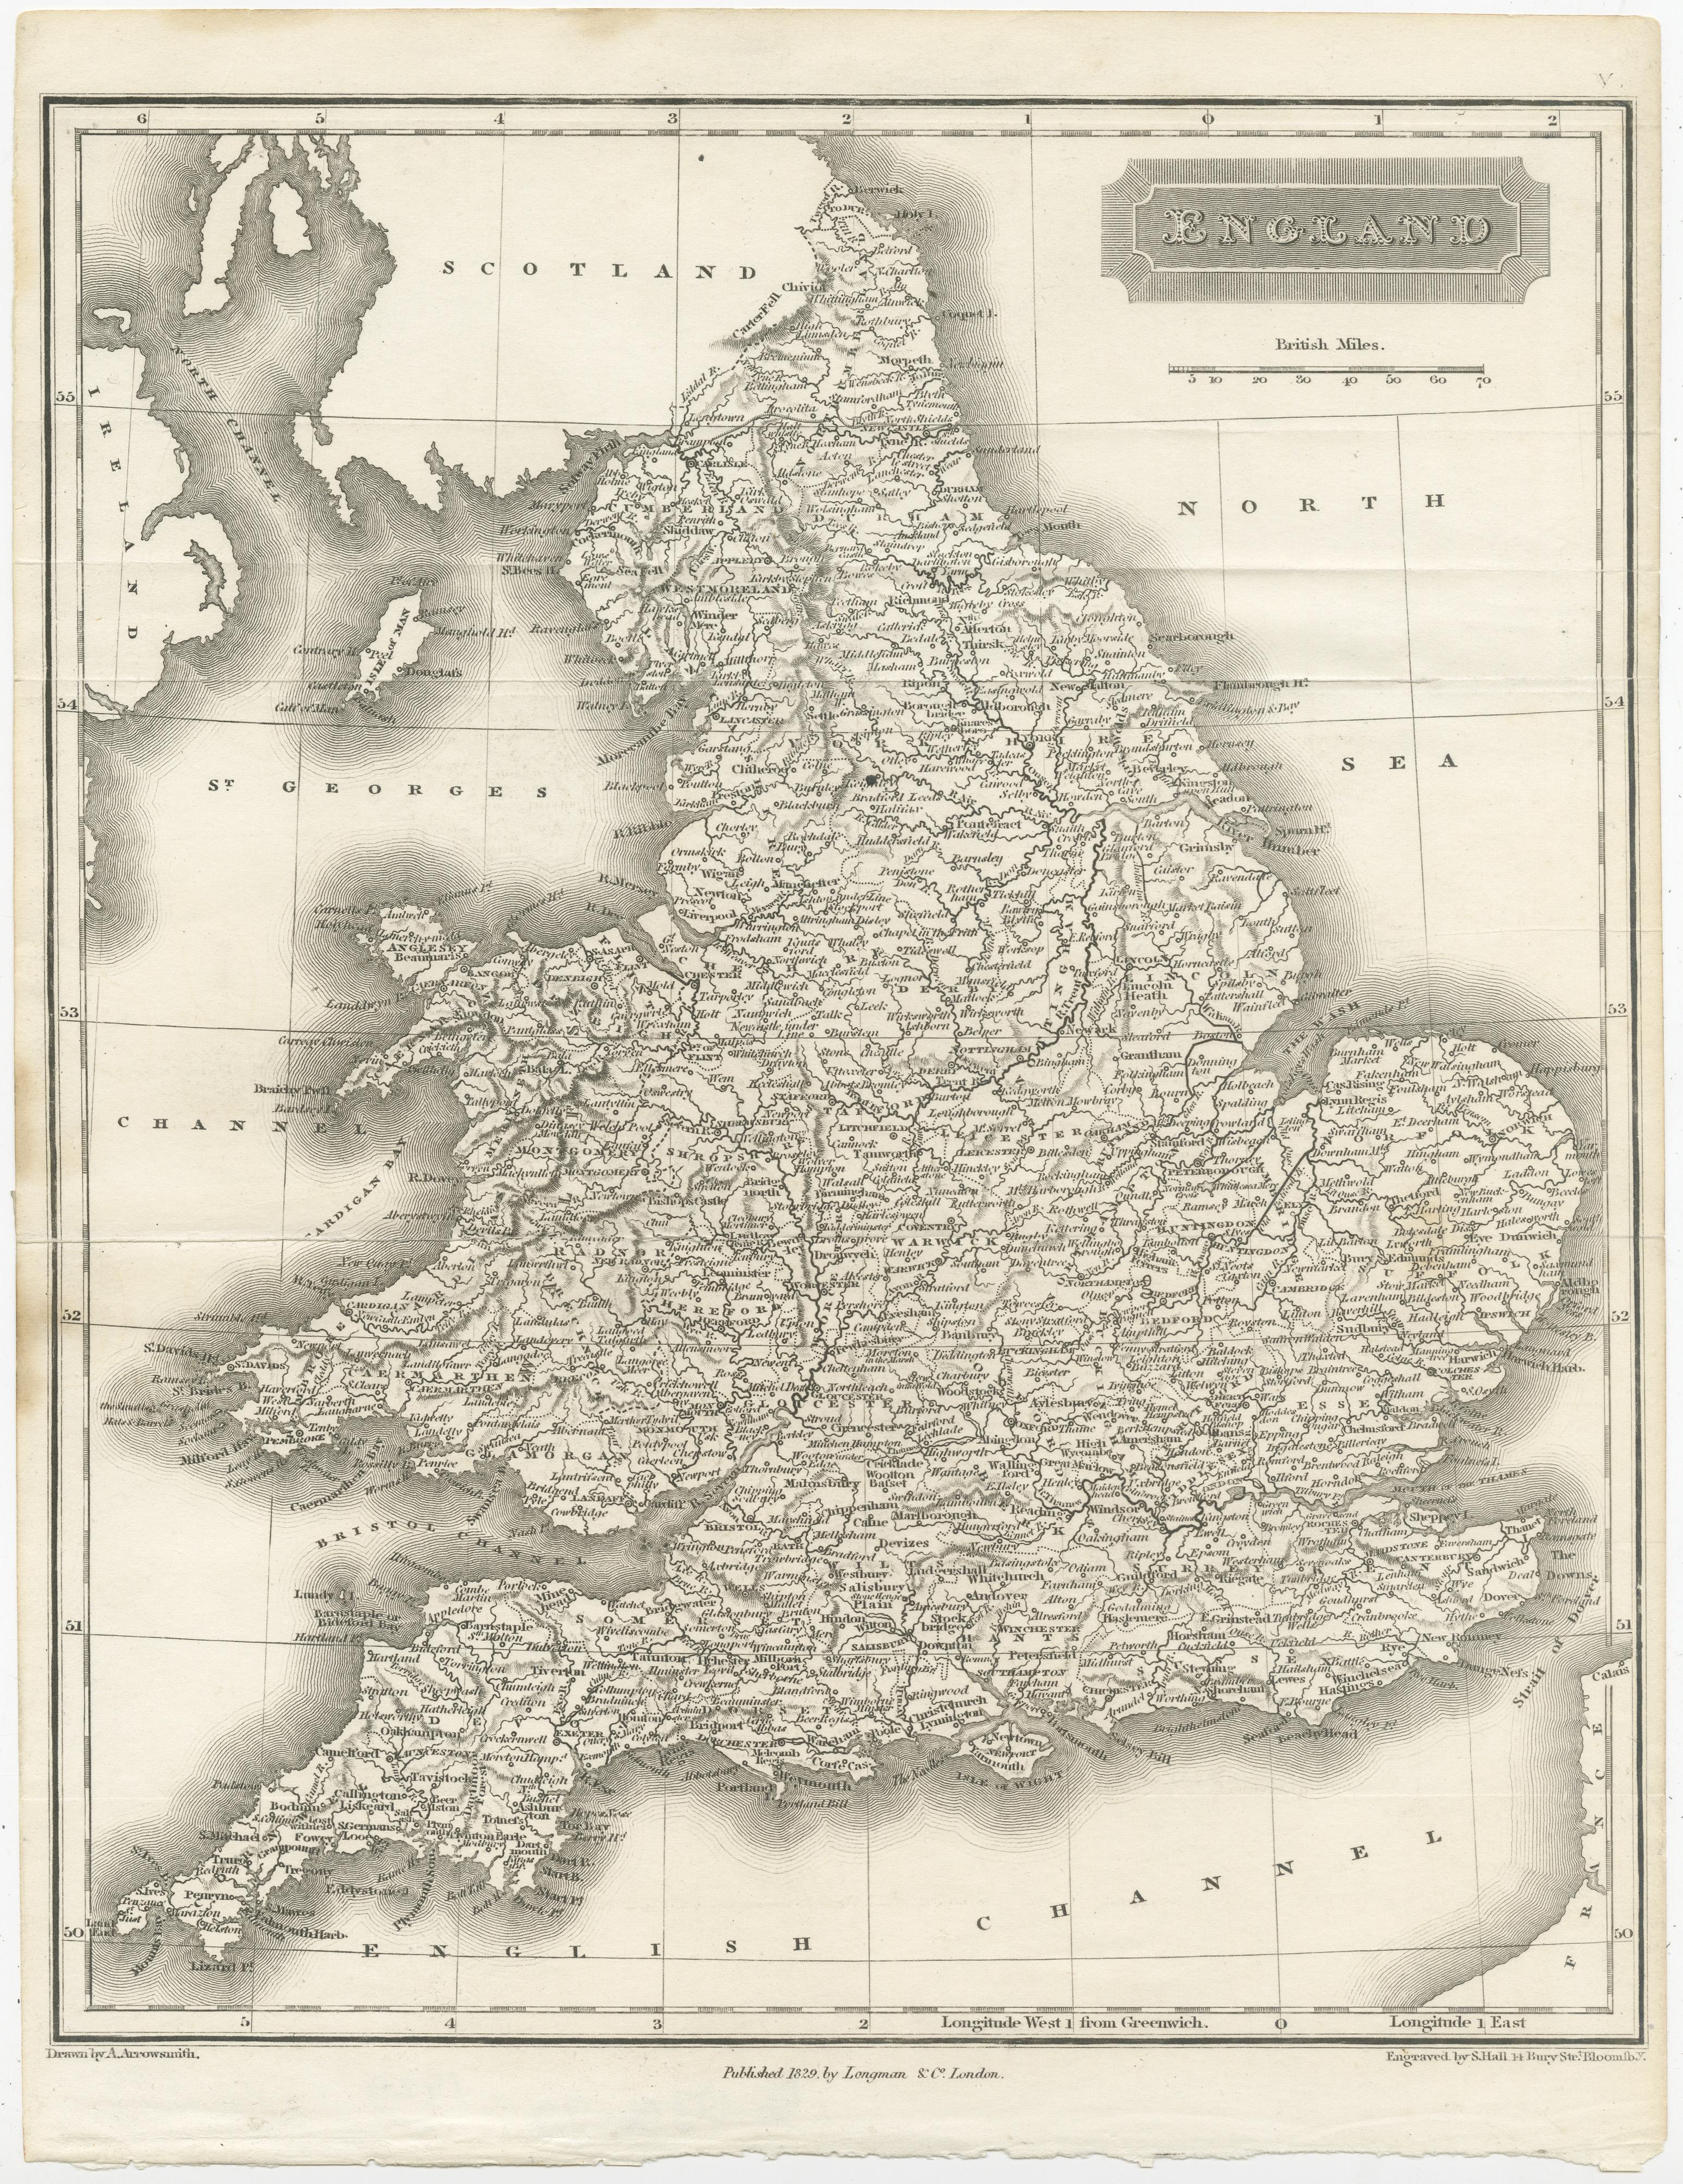 Antique map titled 'England'. Original steel engraved map of England. Drawn by A. Arrowsmith, engraved by S. Hall. Published 1829 by Longman & Co, London.